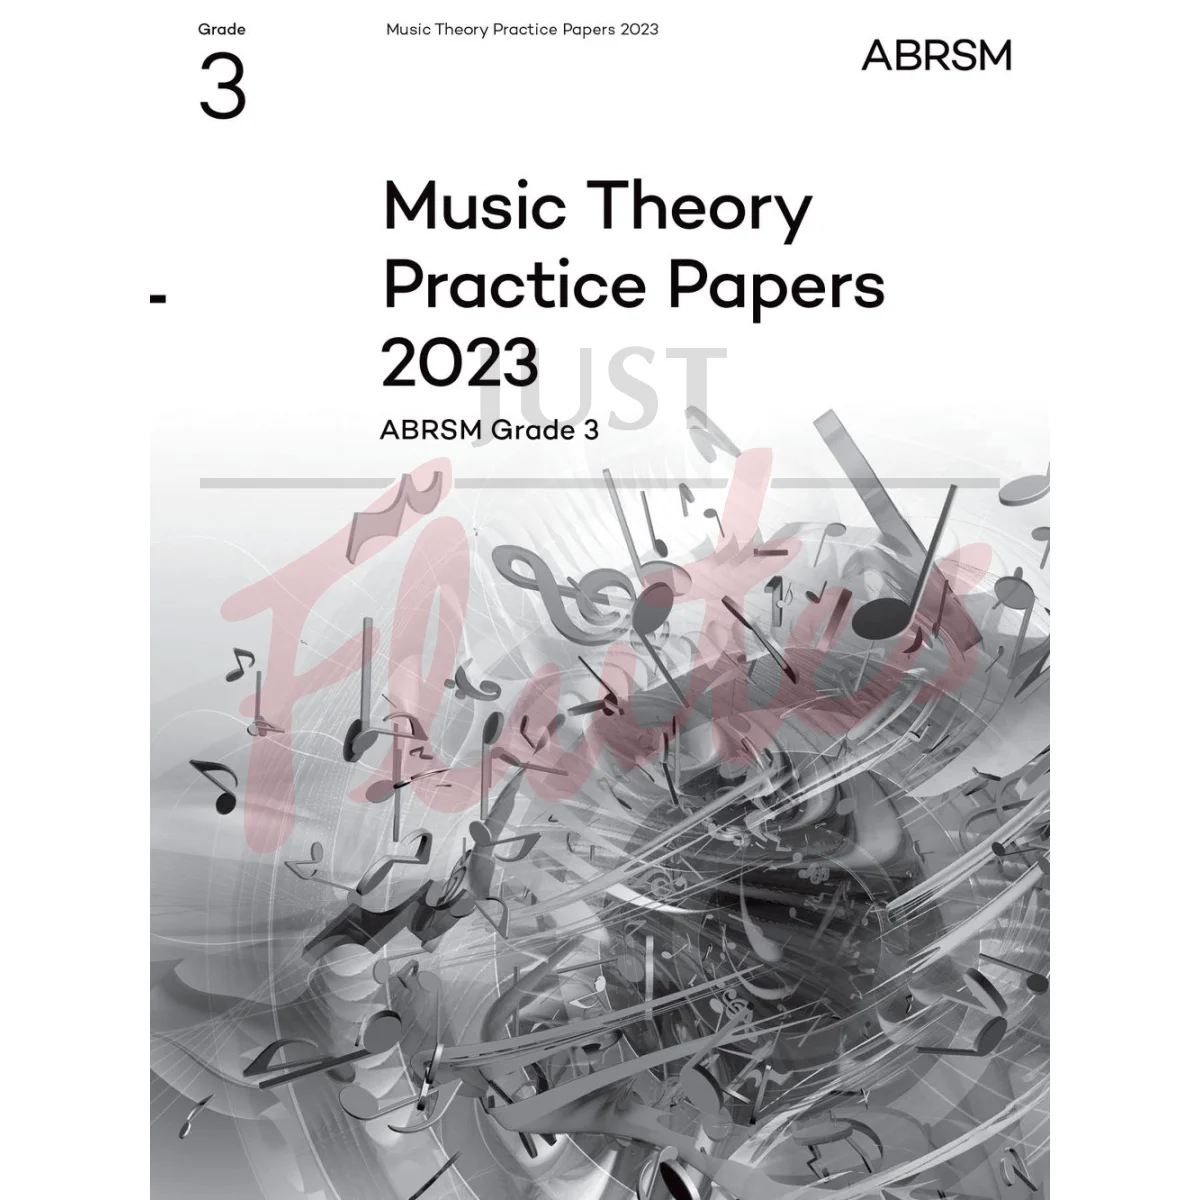 Music Theory Practice Papers 2023 Grade 3